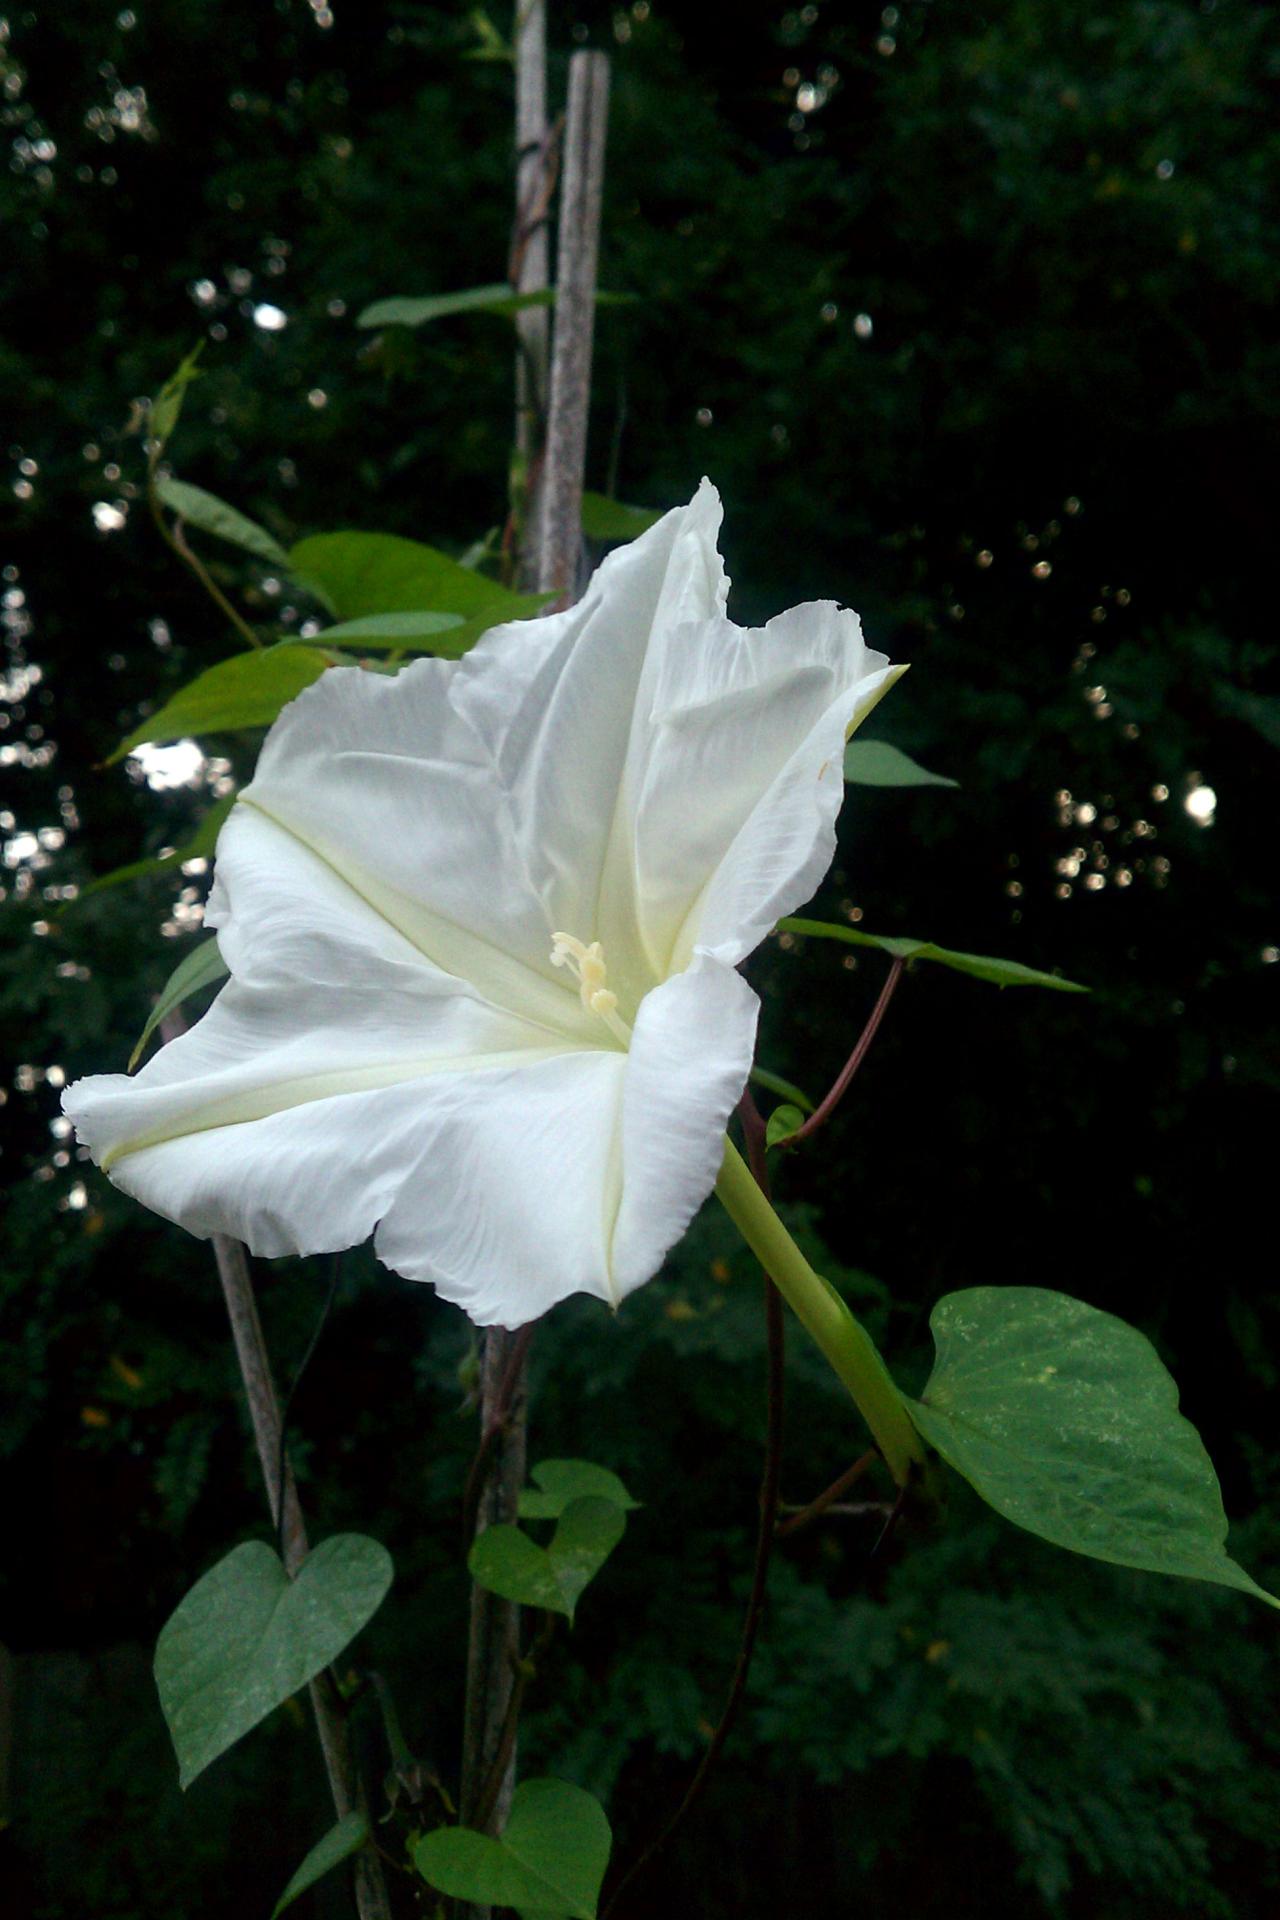 How To Grow And Care For Moonflowers Hgtv,How Long To Cook Chicken Breast In Oven At 350